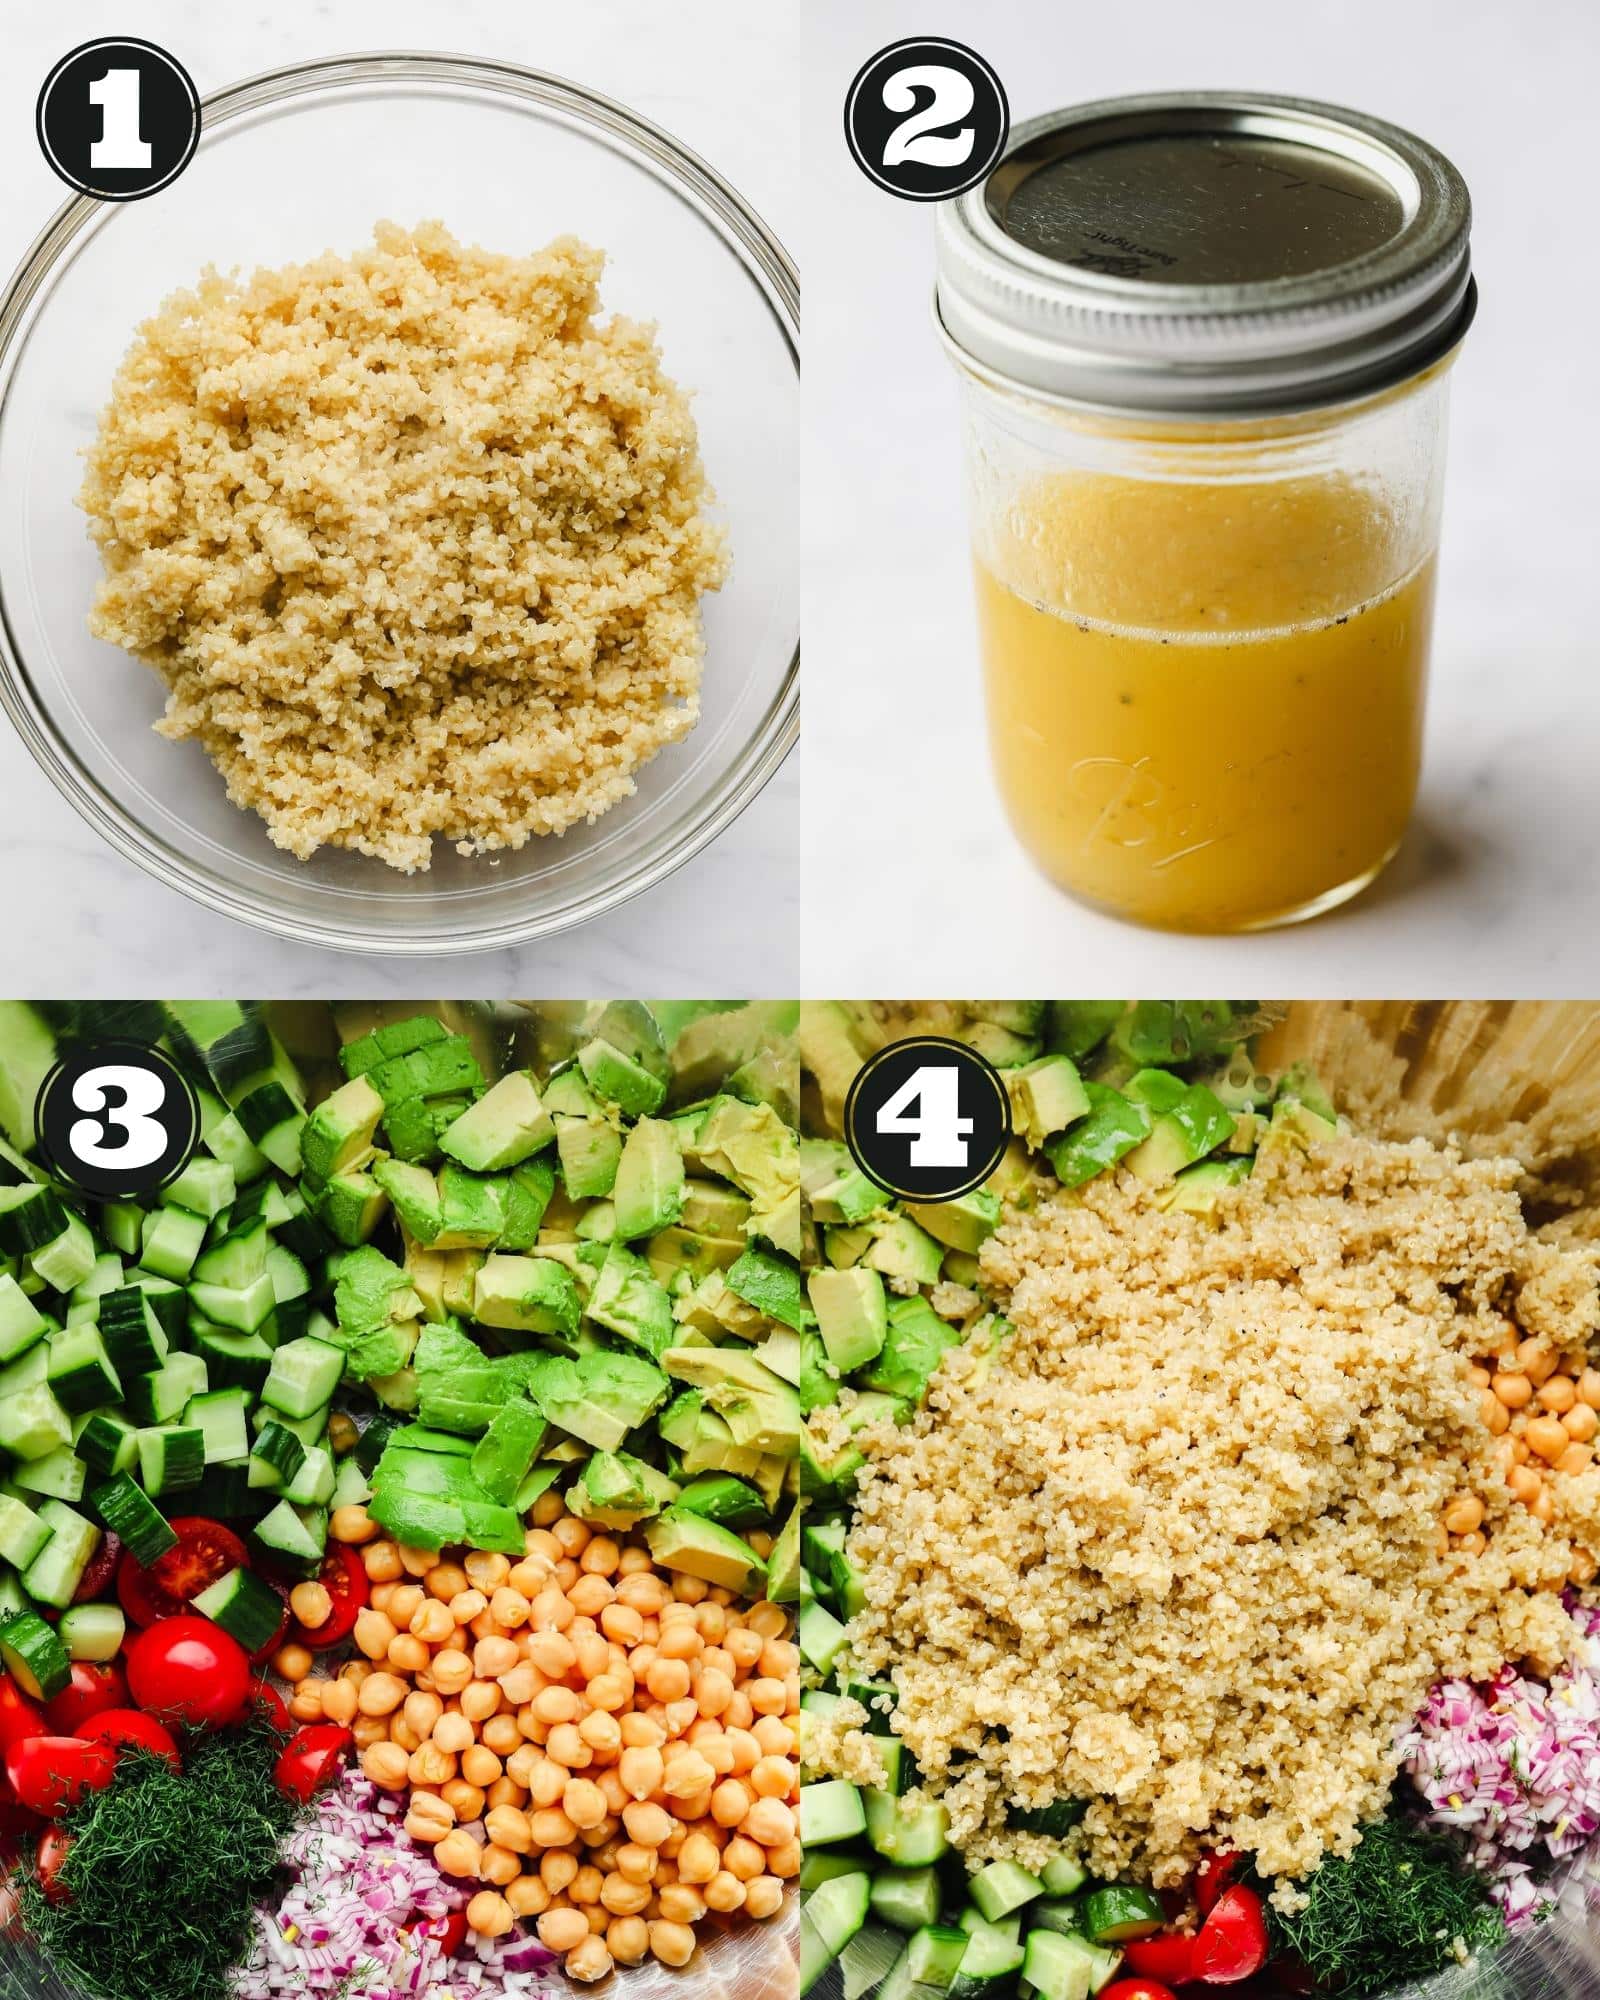 4 images showing the process of cooking quinoa, making a salad dressing, and assembling a chickpea quinoa salad.